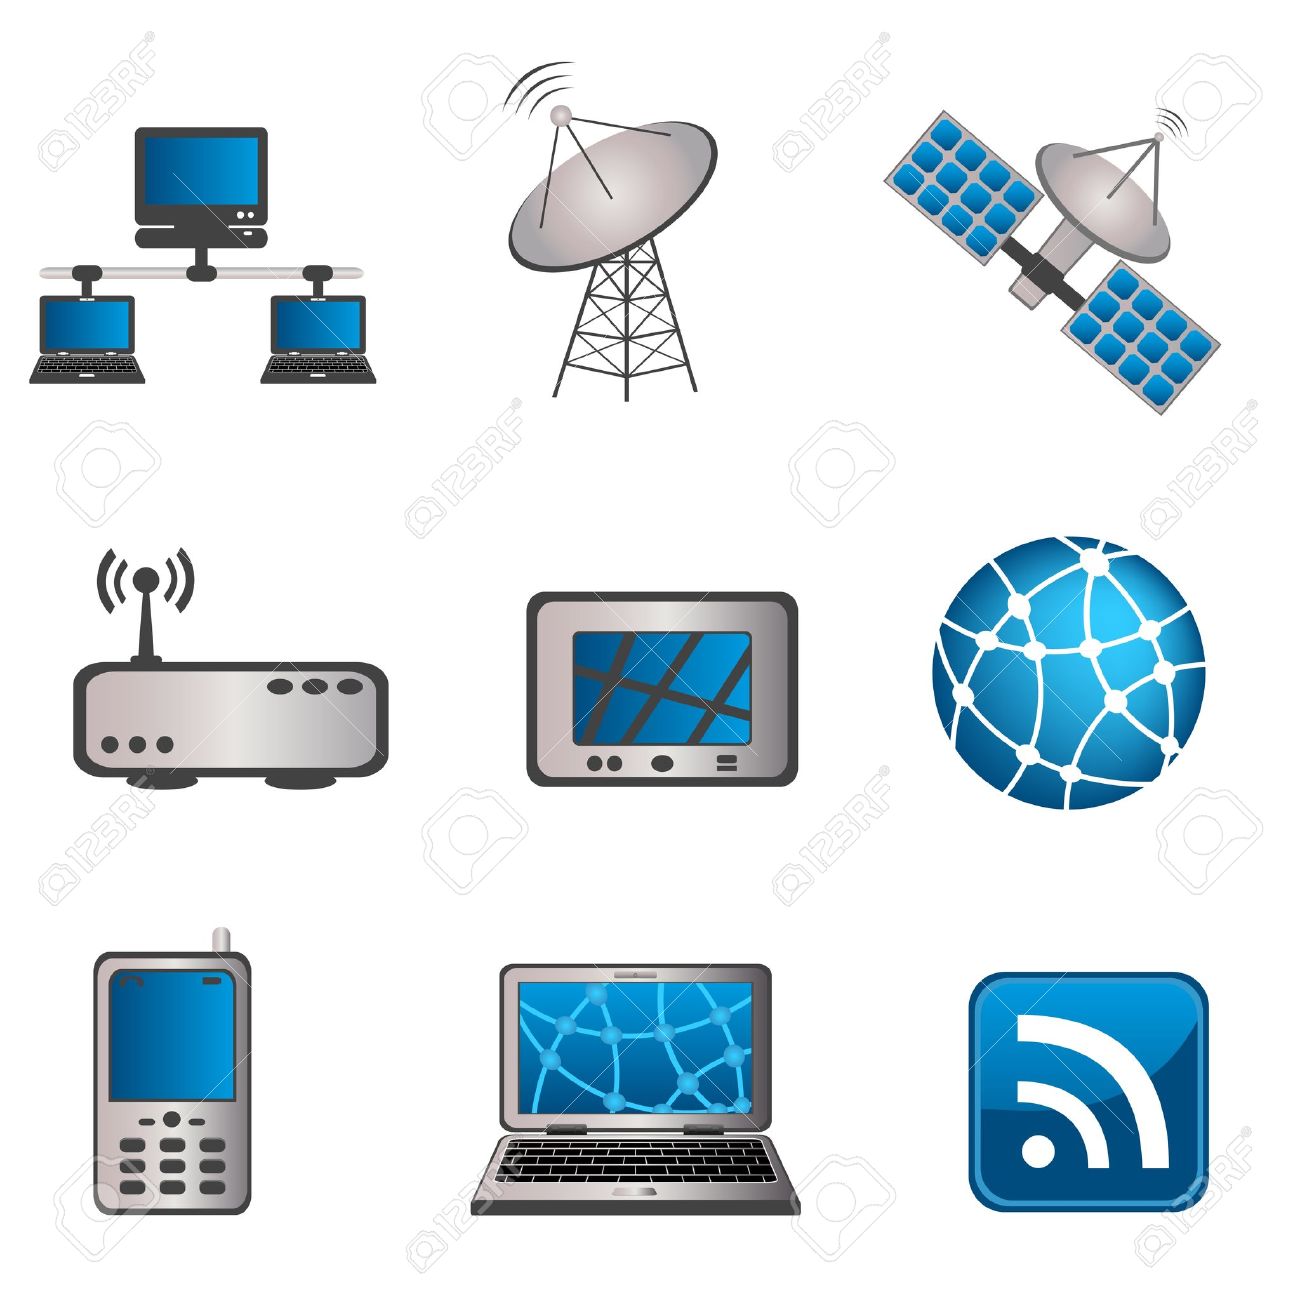 computer technology clipart free - photo #49